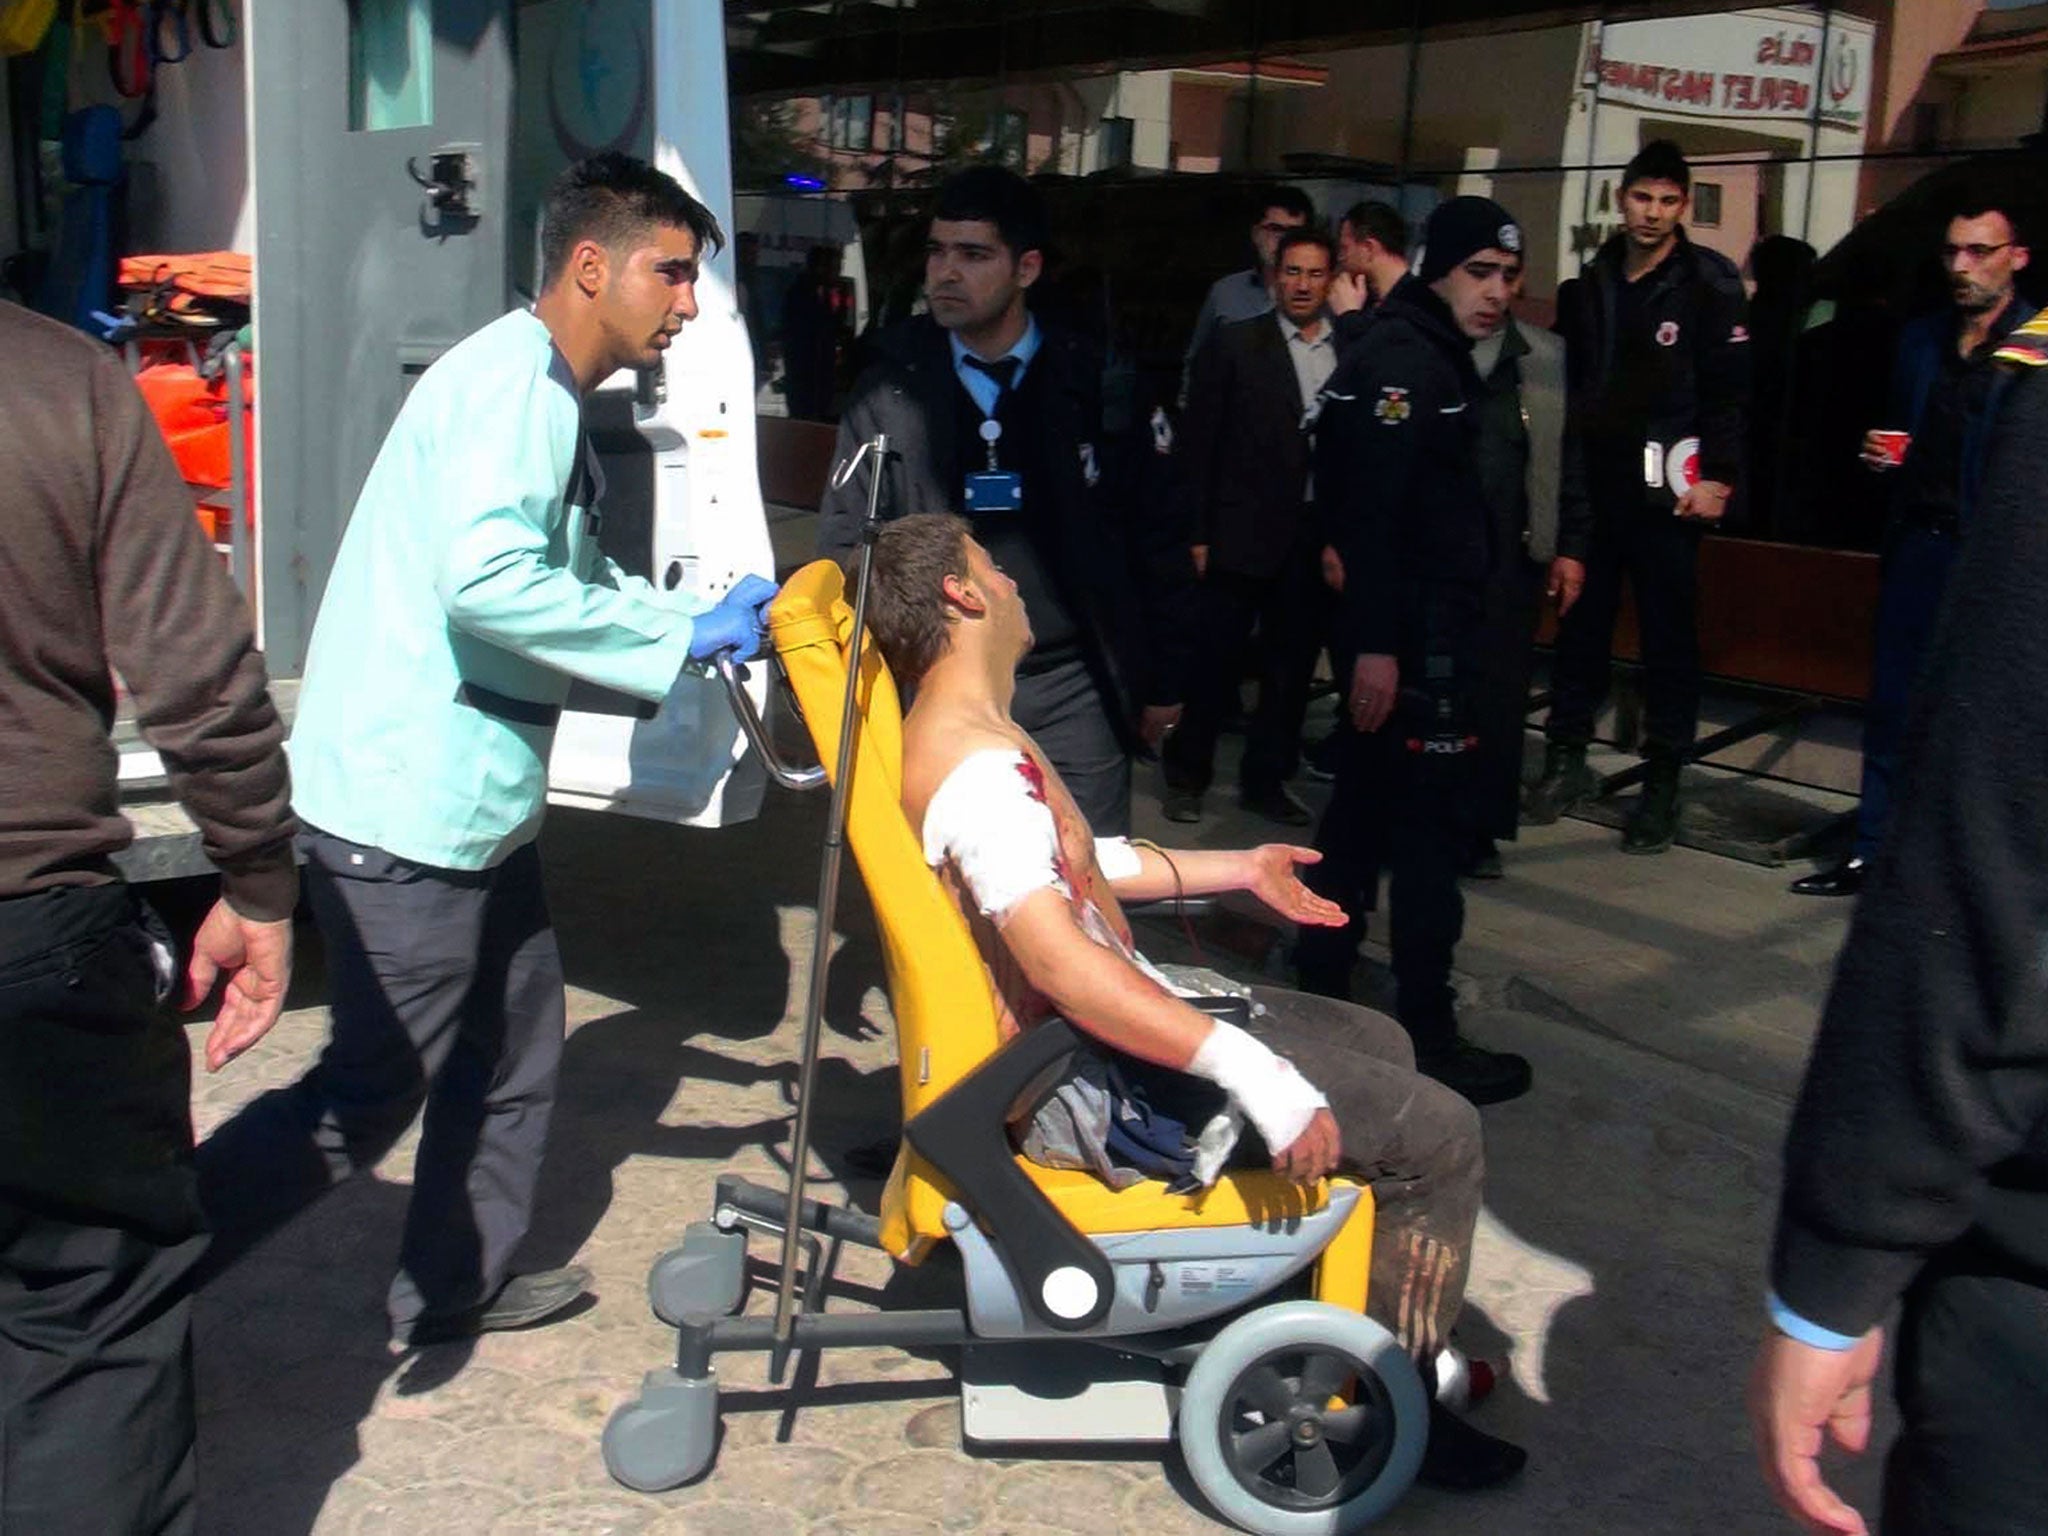 More than 40 victims were transferred over the Turkish border to be treated in a hospital in Kilis